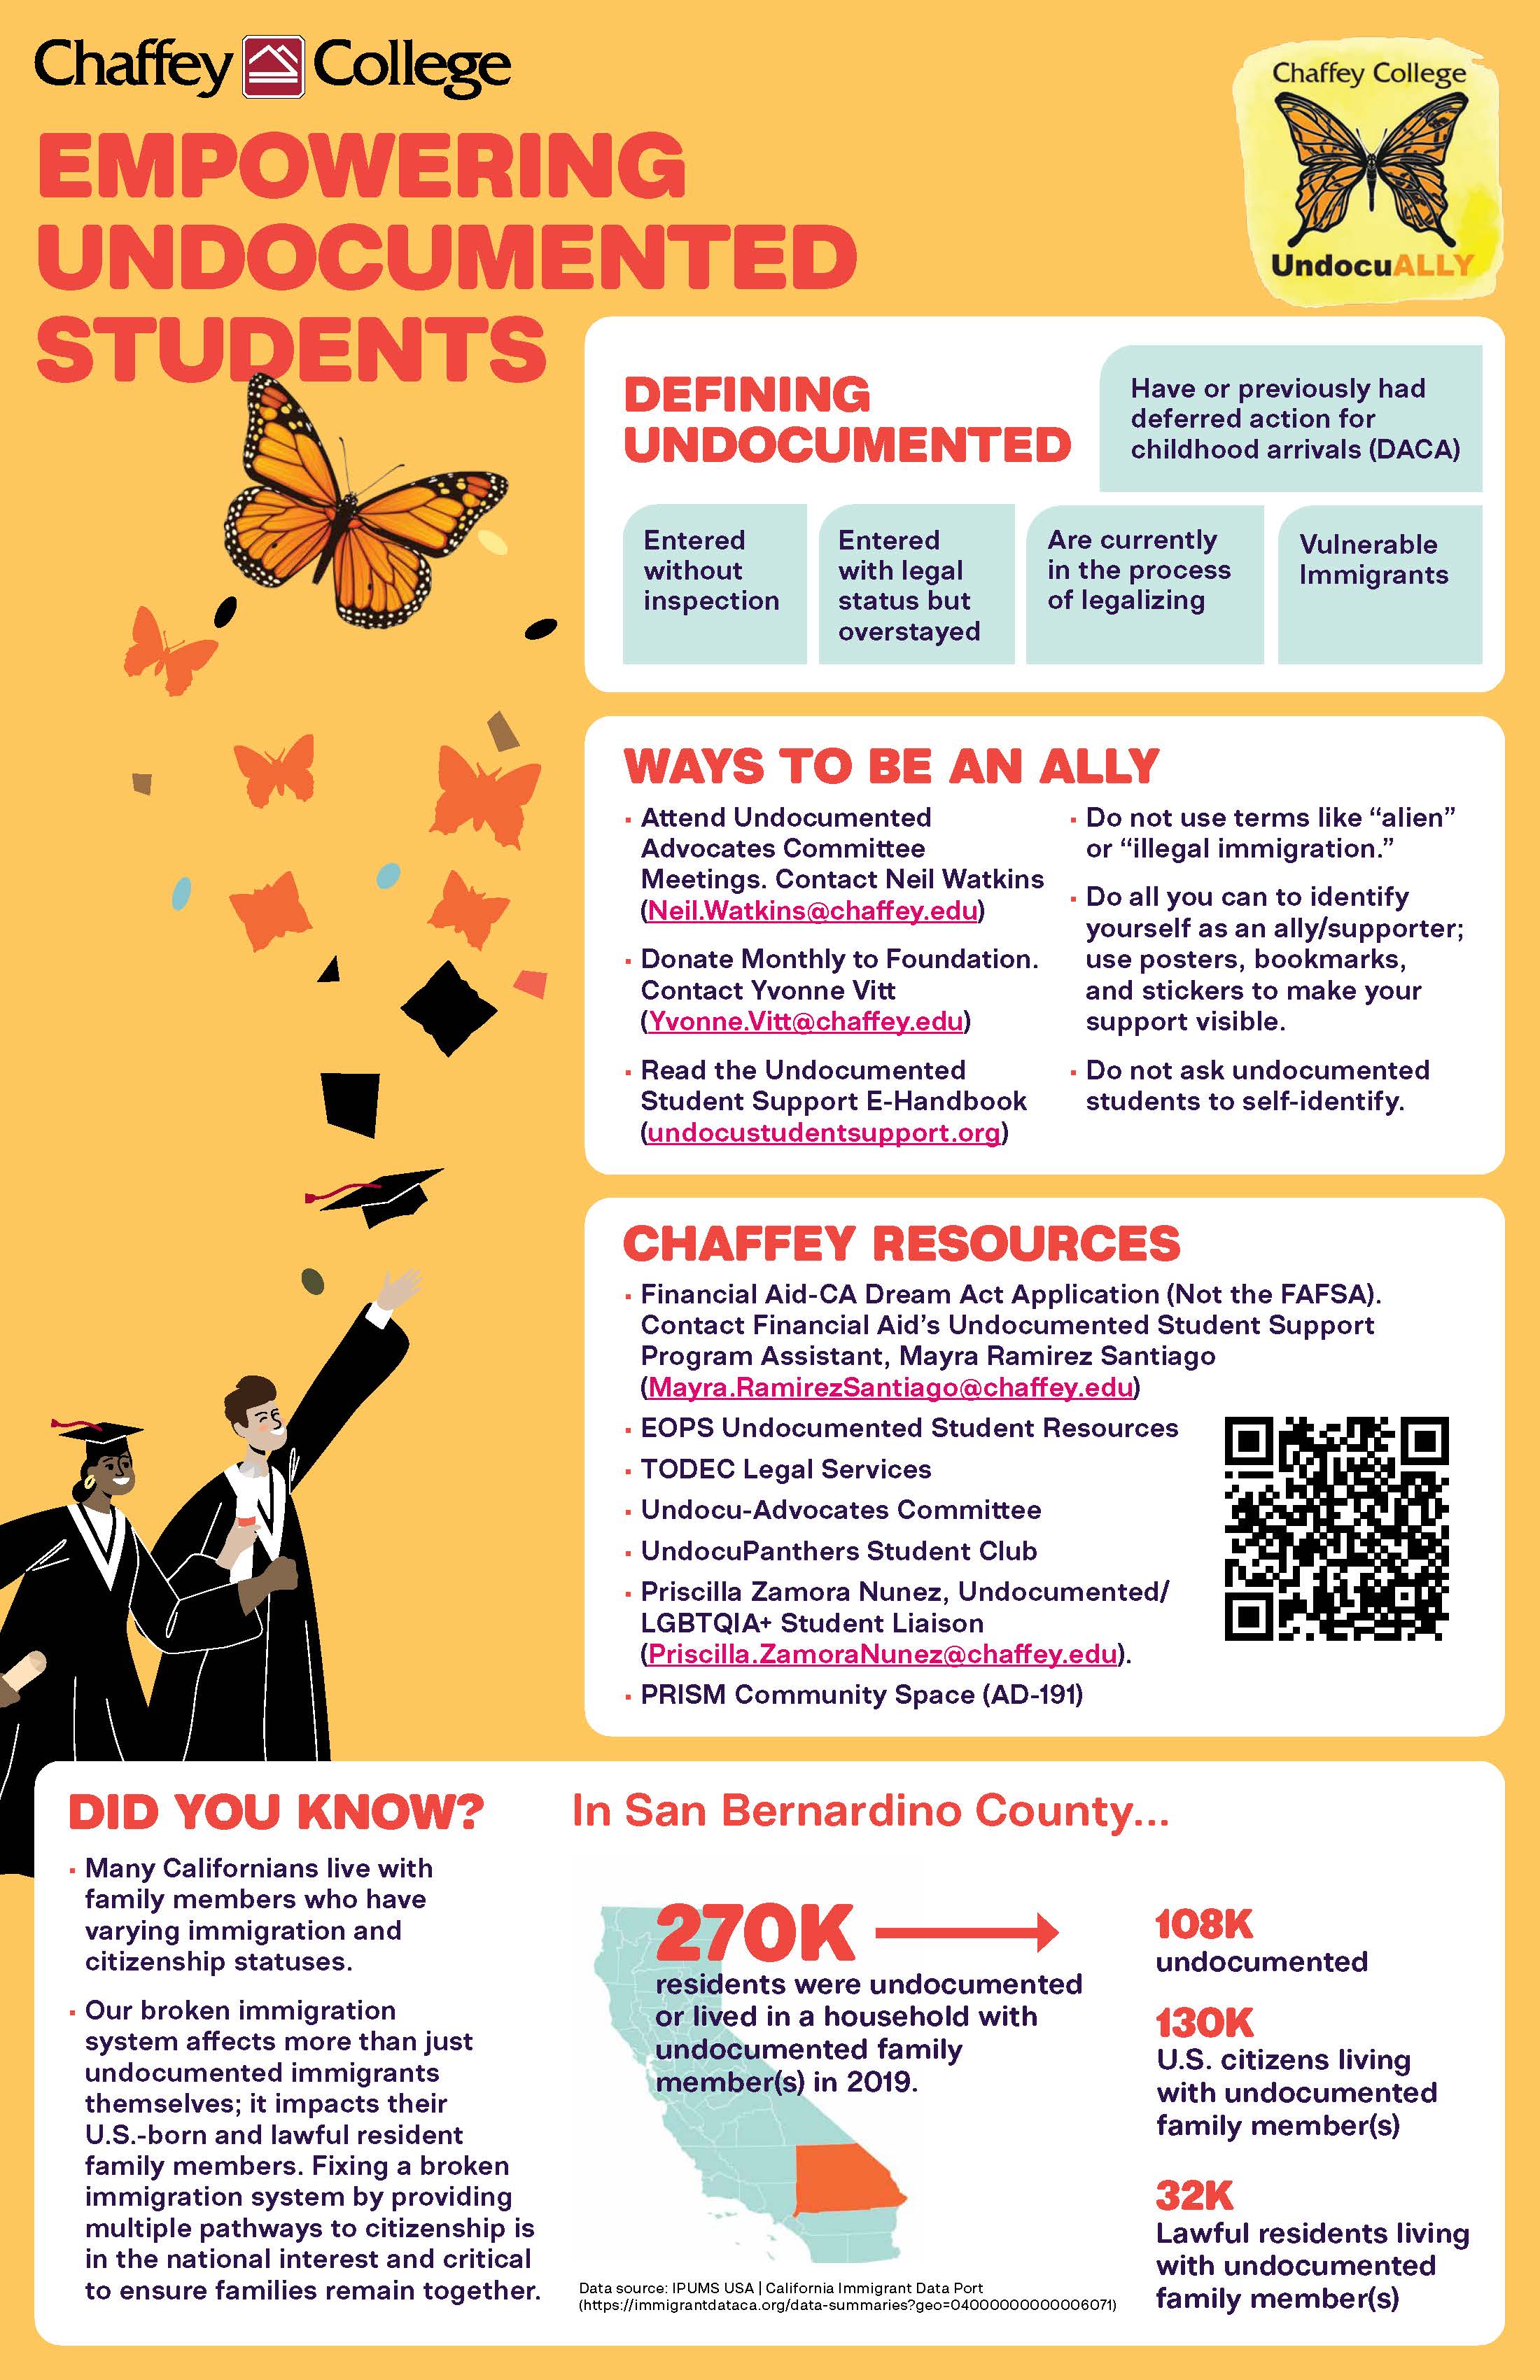 Empowering undocumented students infographic